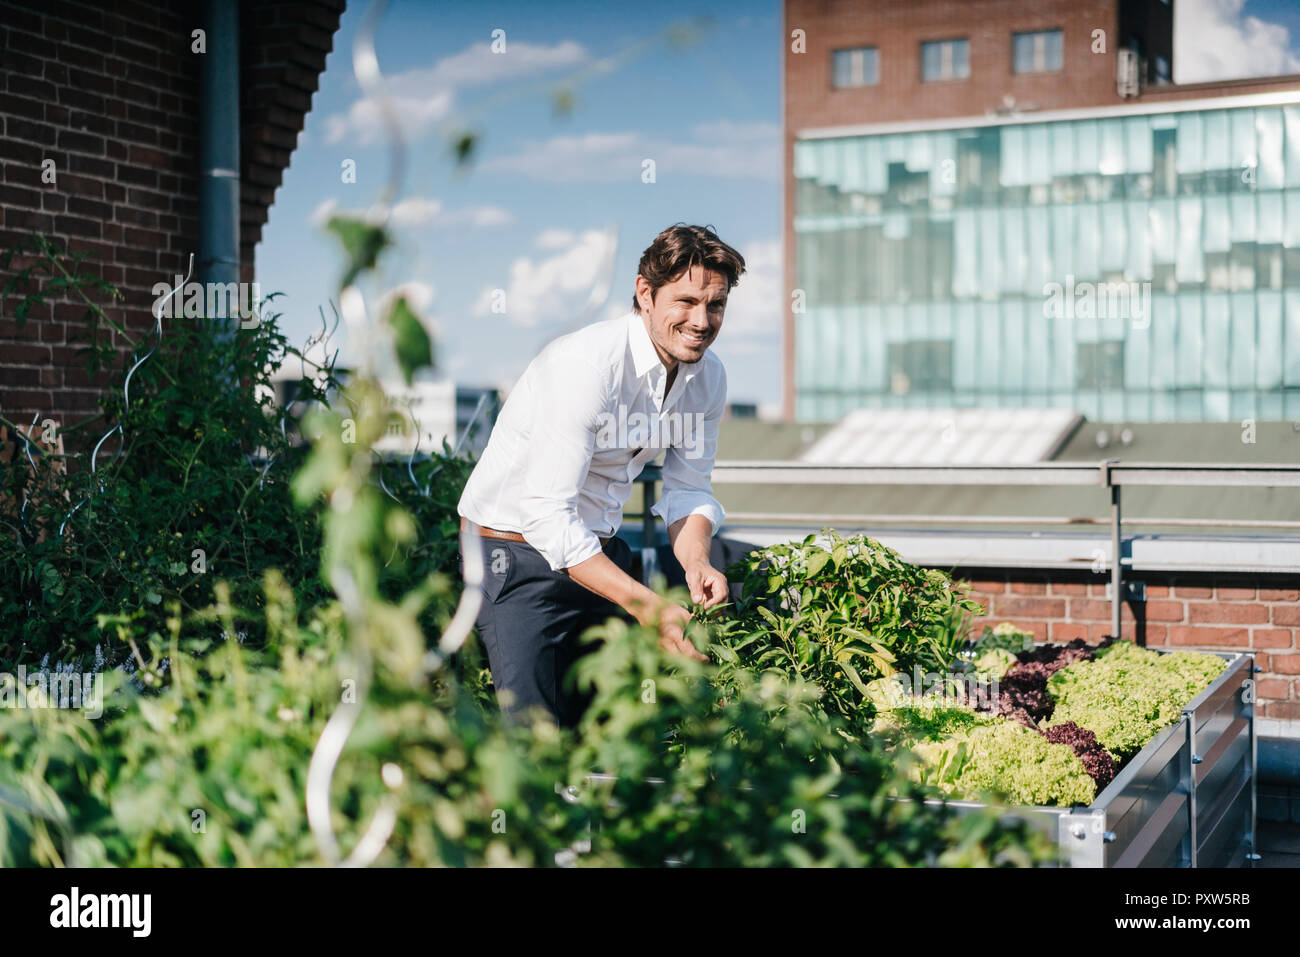 Businessman cultivating plants in his urban rooftop garden Stock Photo